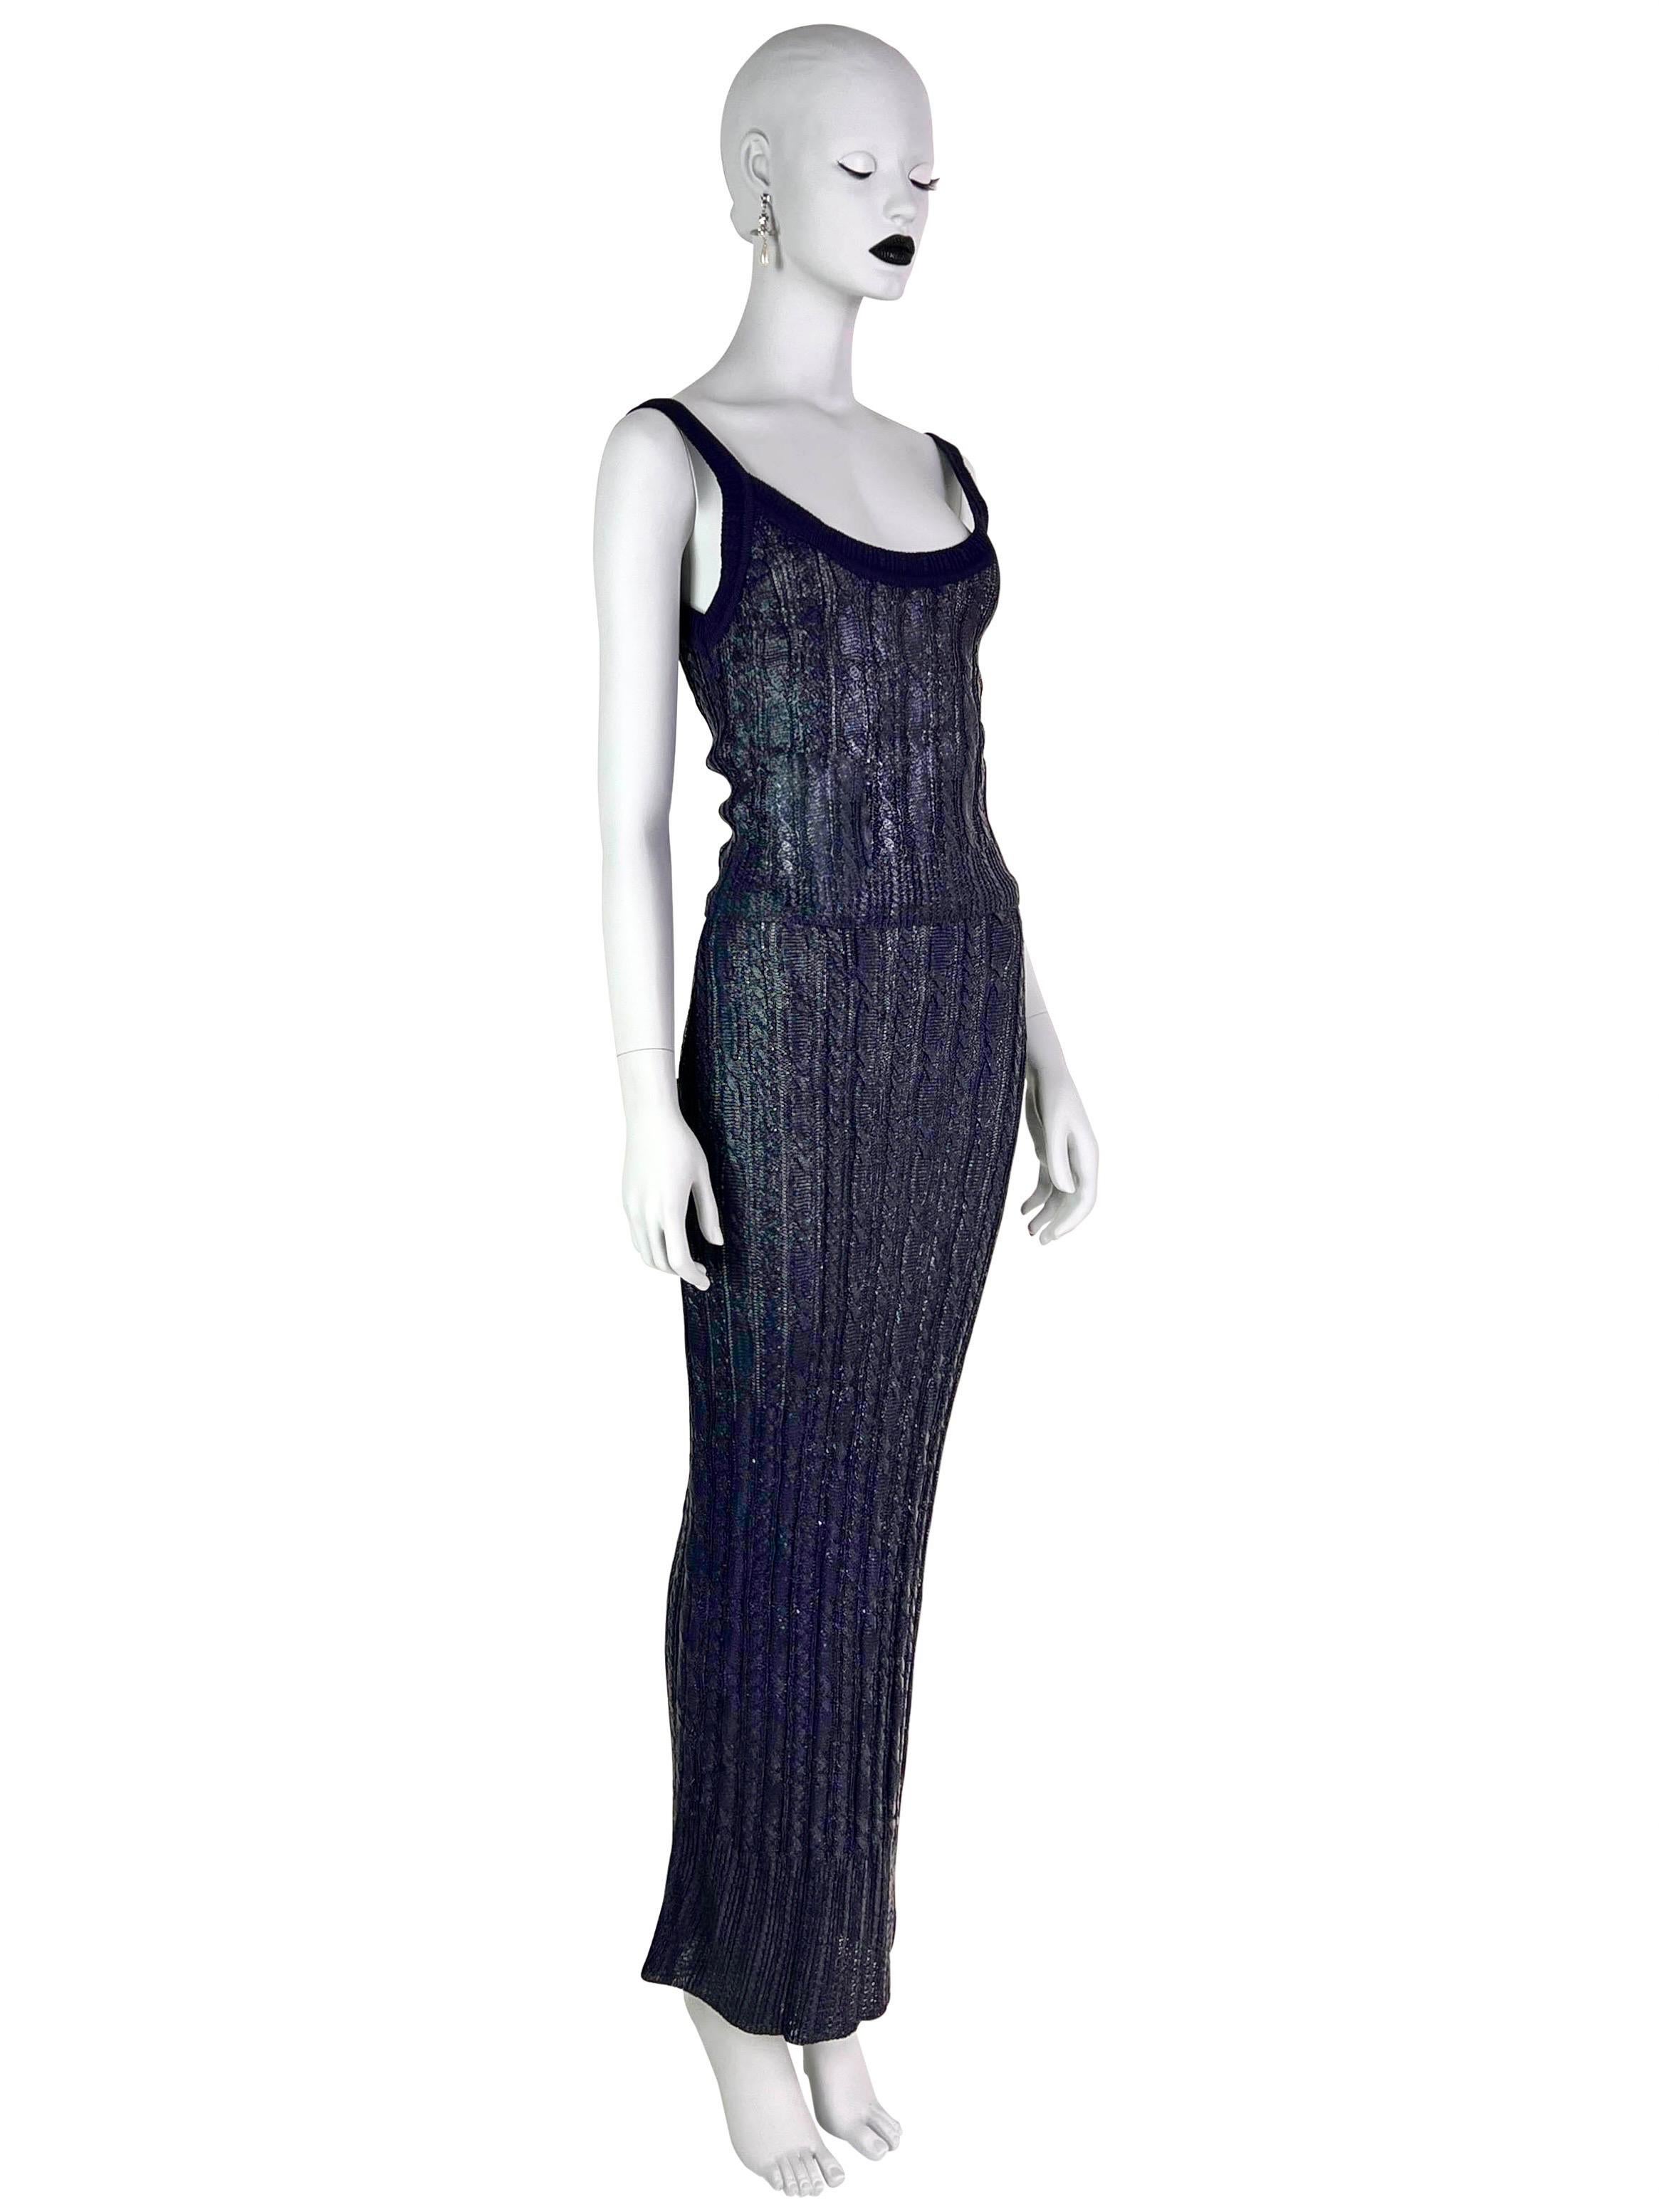 SS 1999 Dior by John Galliano RTW Rubber Knit 3-pieces ensemble In Excellent Condition For Sale In Prague, CZ